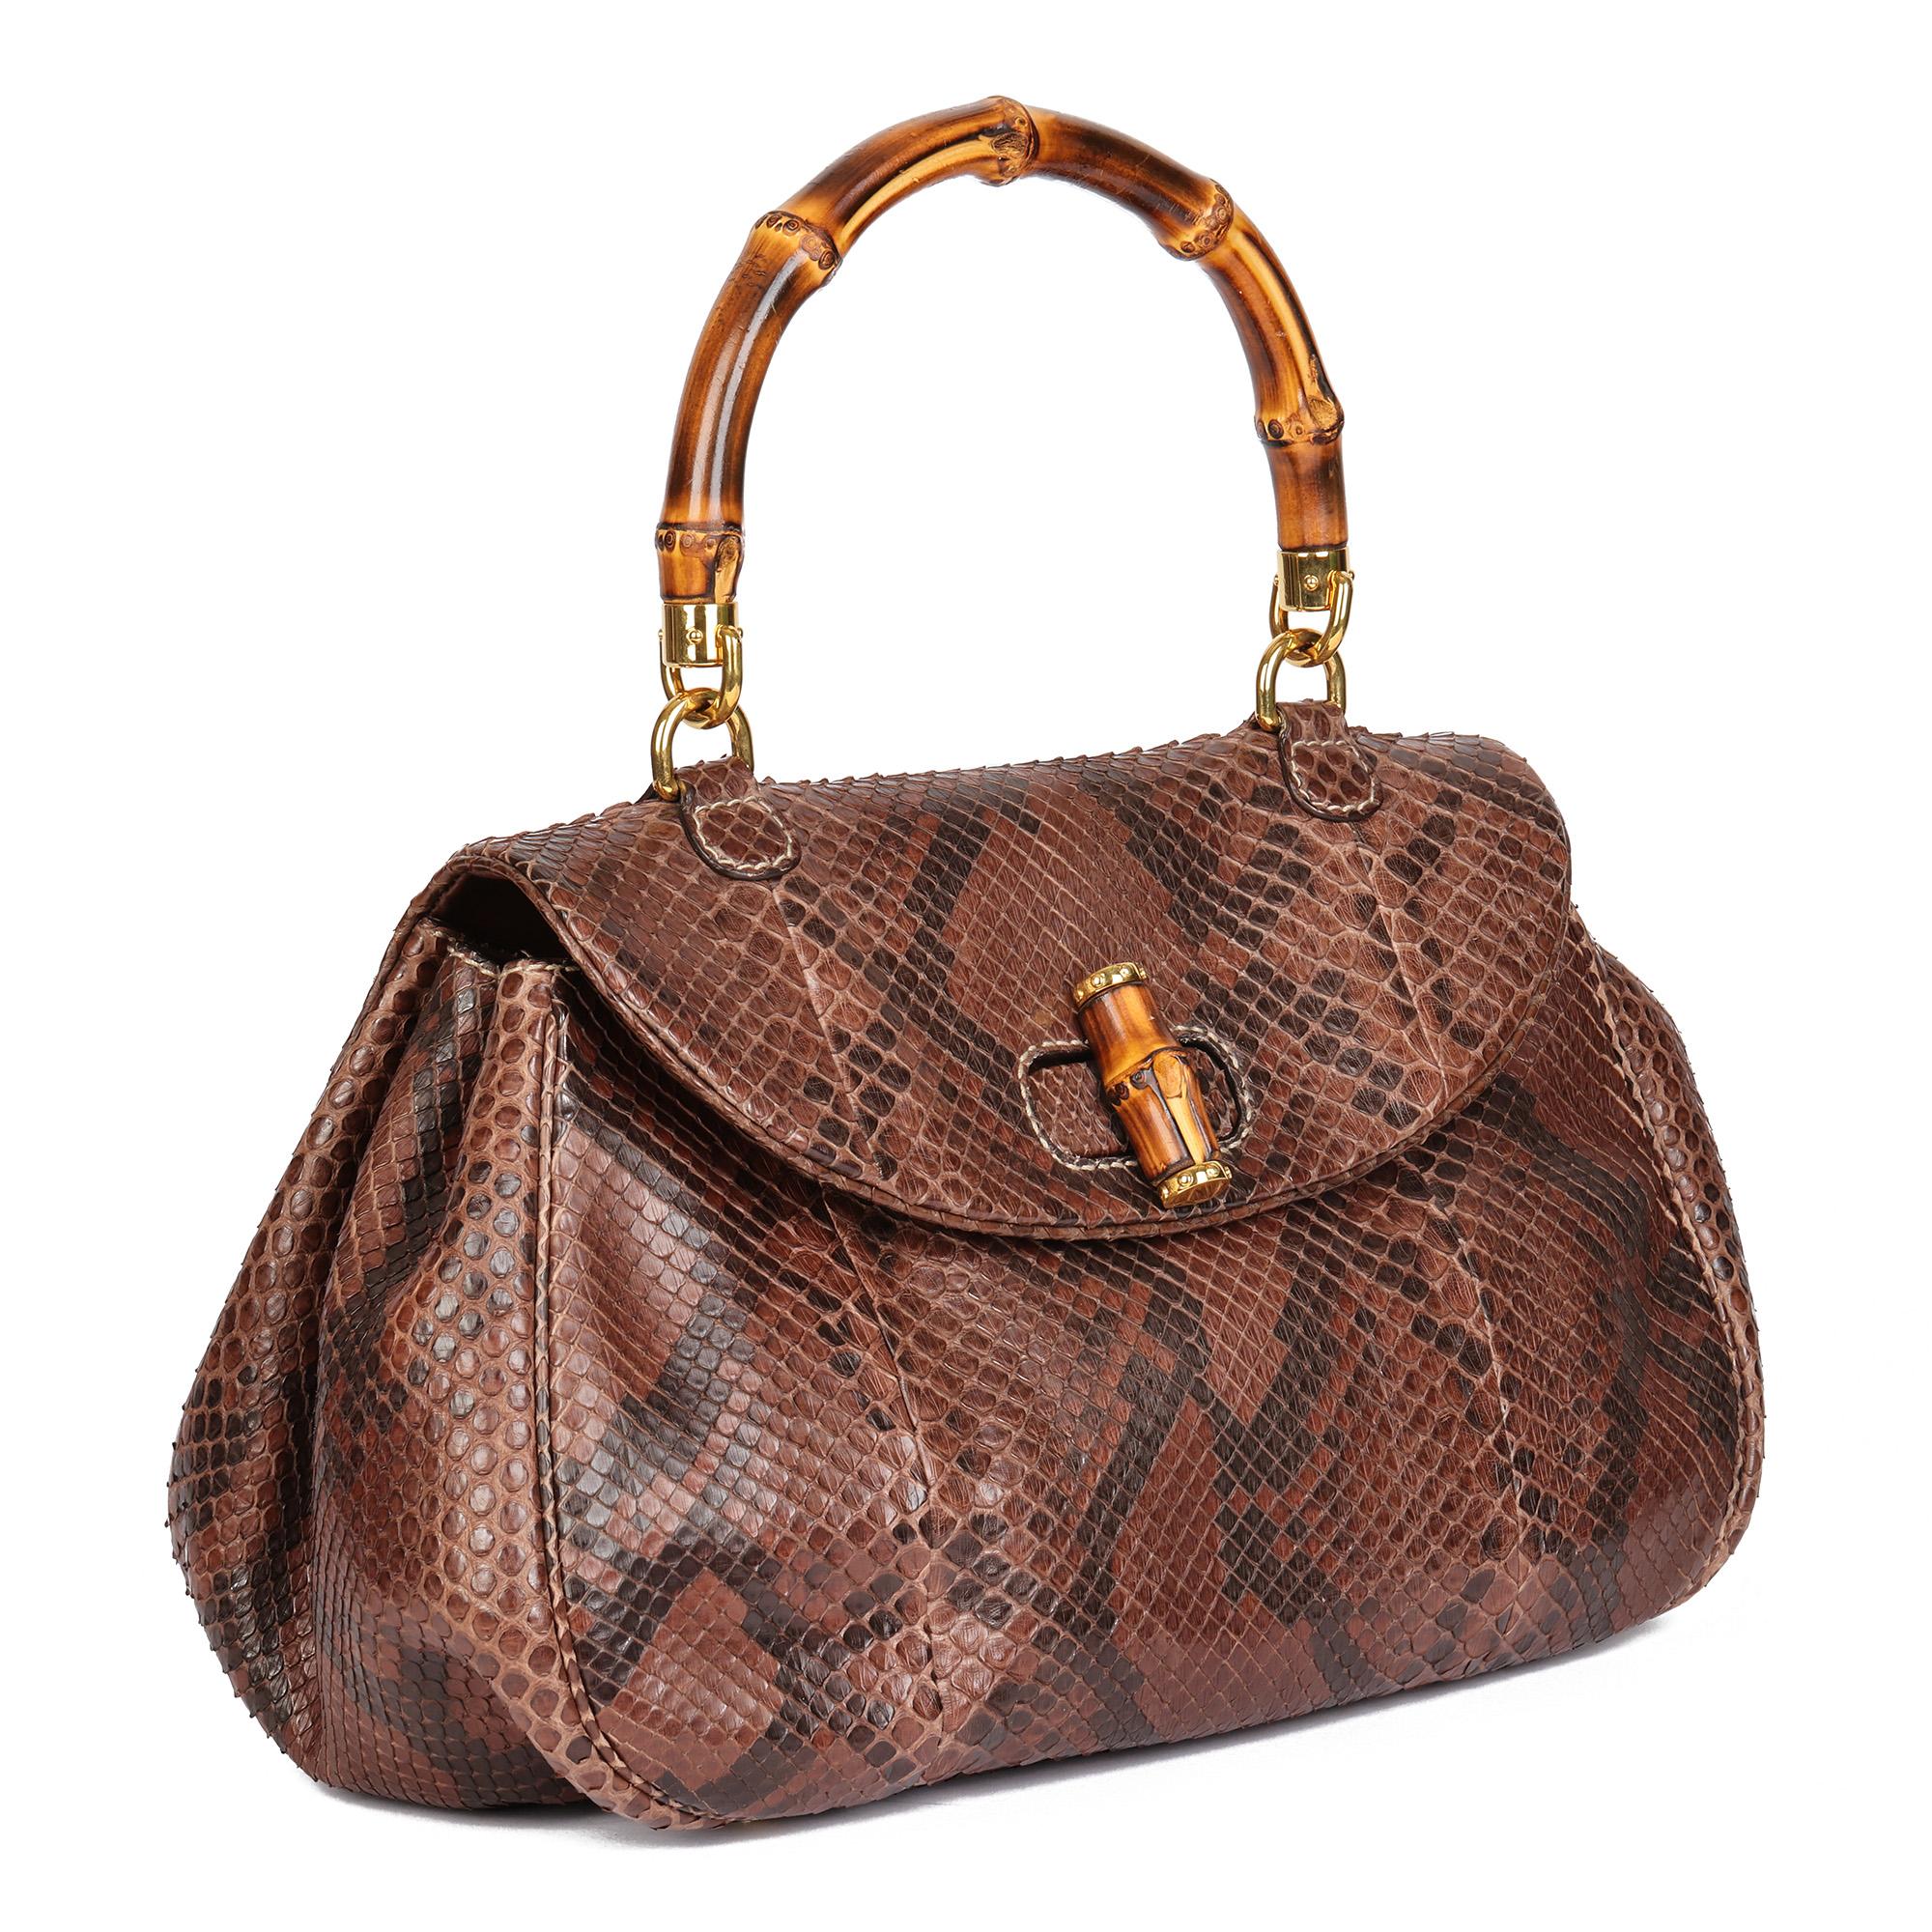 GUCCI
Brown Python Leather Vintage Bamboo Classic Top Handle

Serial Number: 195436 02026
Age (Circa): 1990
Accompanied By: Gucci Care Booklet
Authenticity Details: Date Stamp (Made in Italy)
Gender: Ladies
Type: Top Handle

Colour: Brown
Hardware: